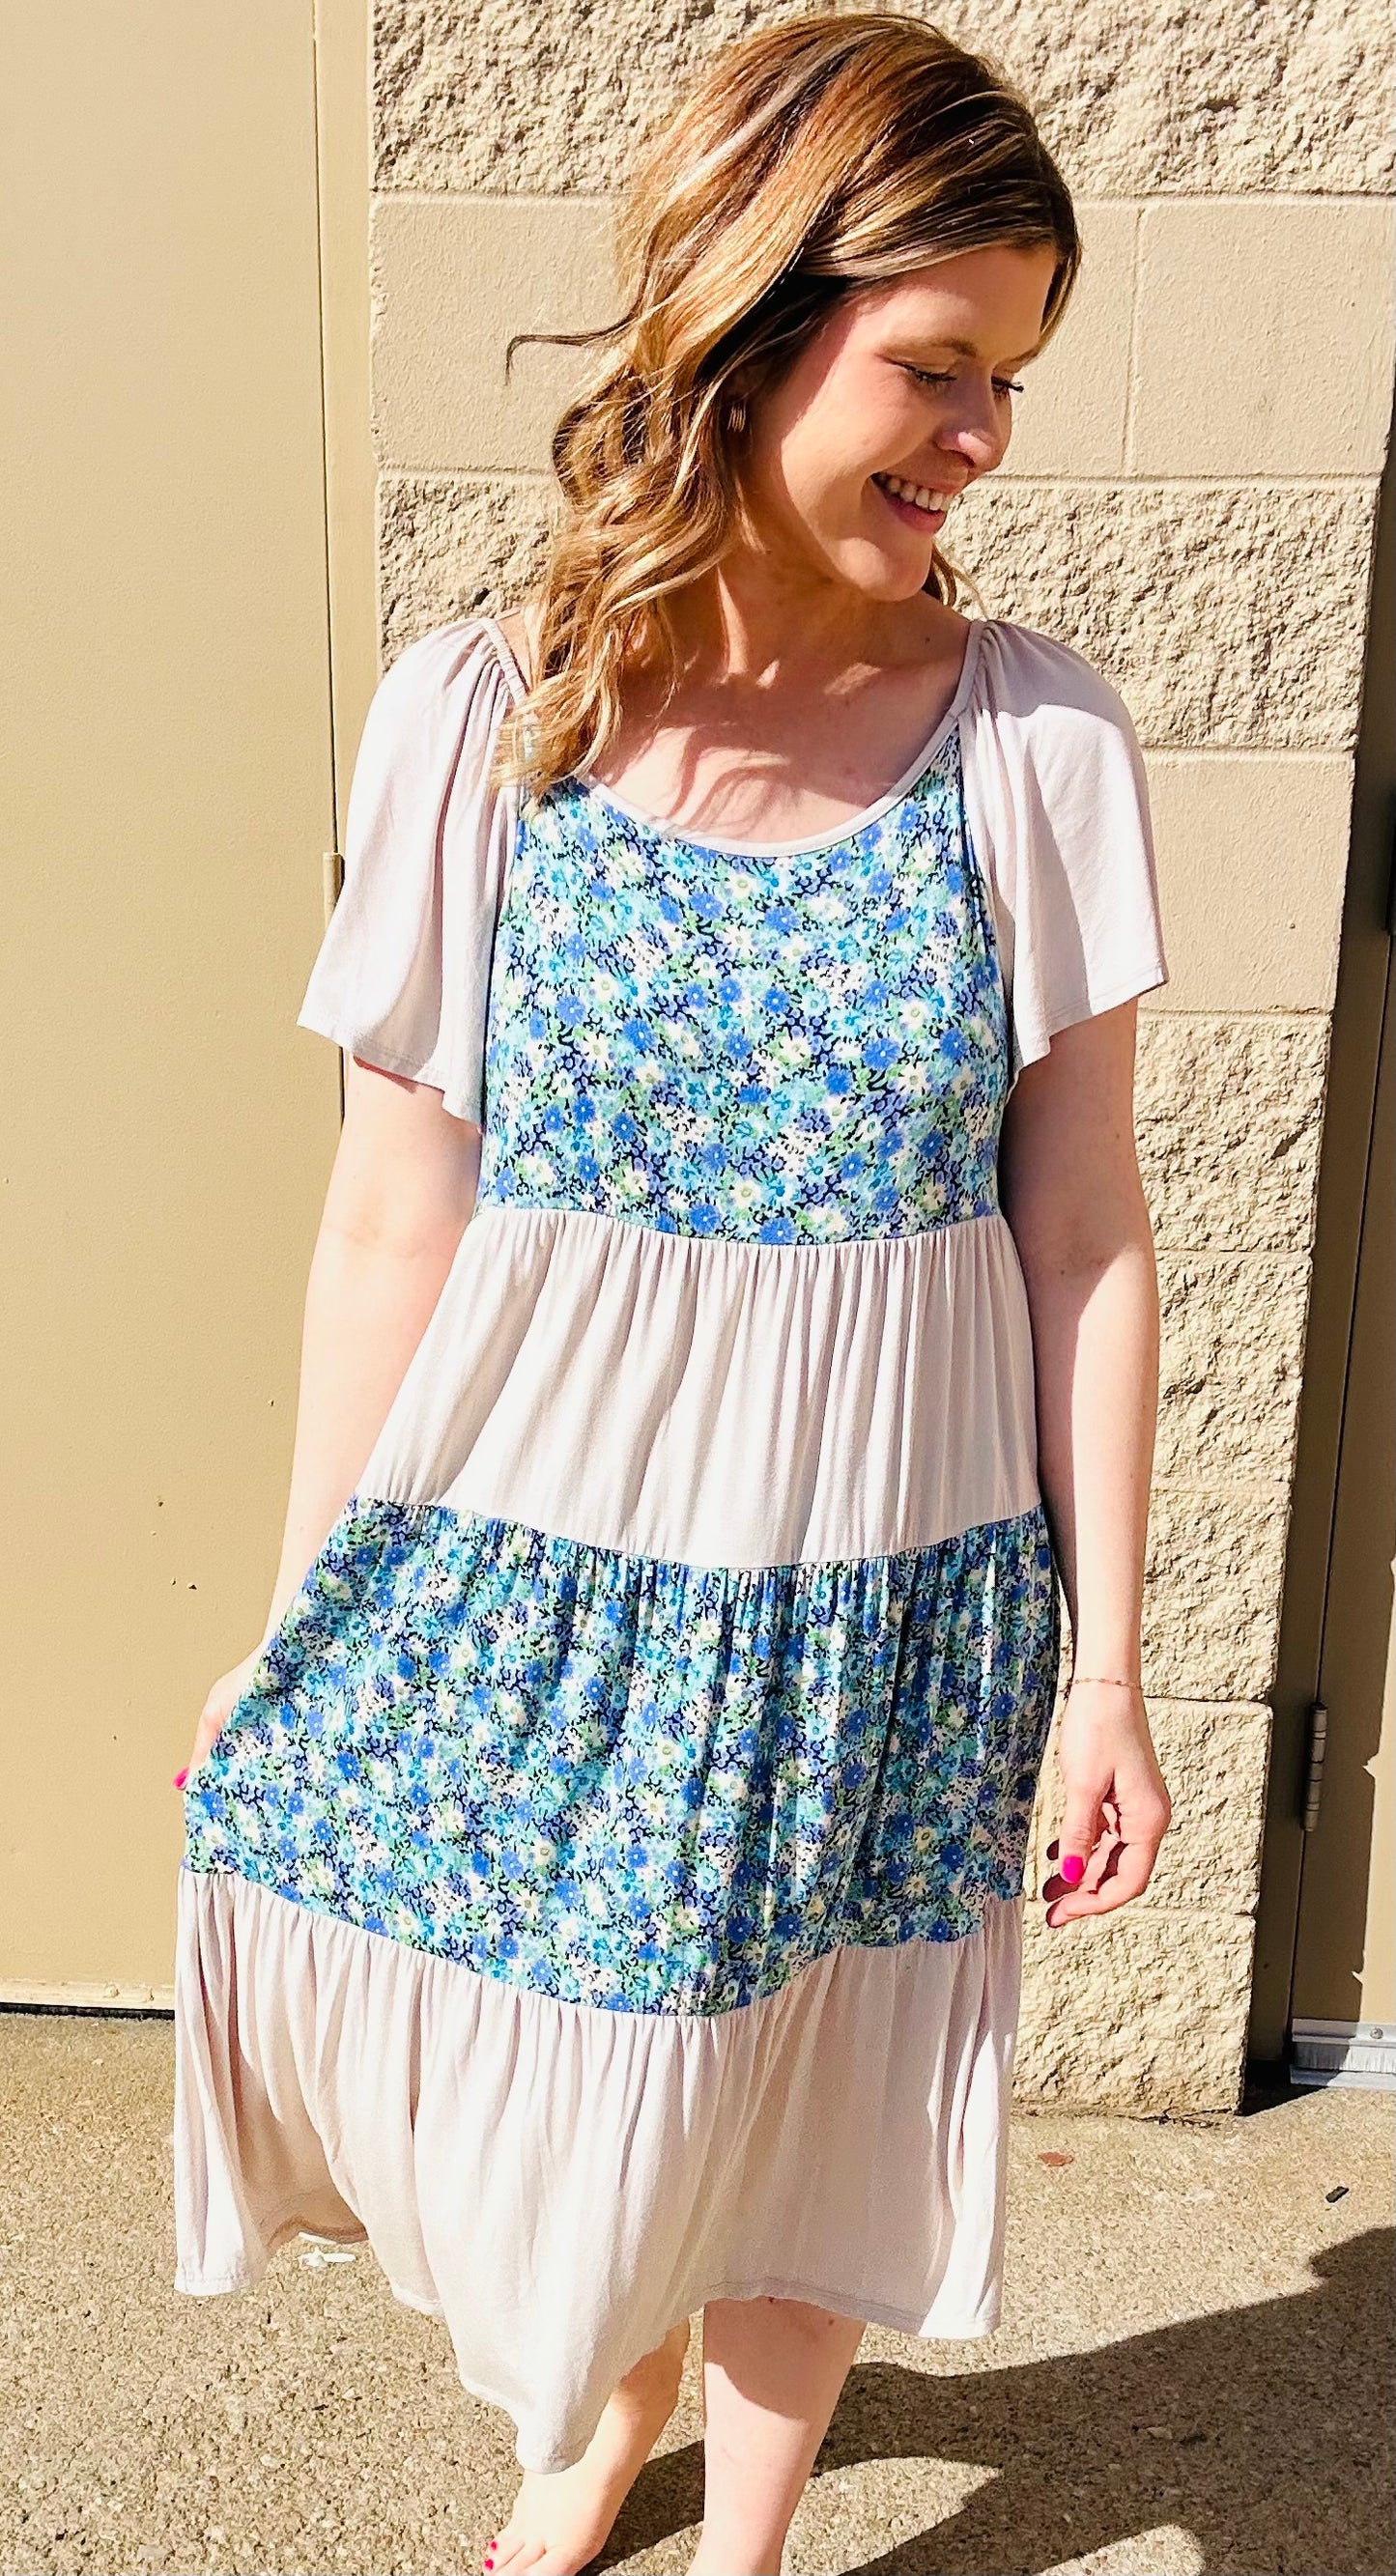 Floral Tiered Colorblock Dress